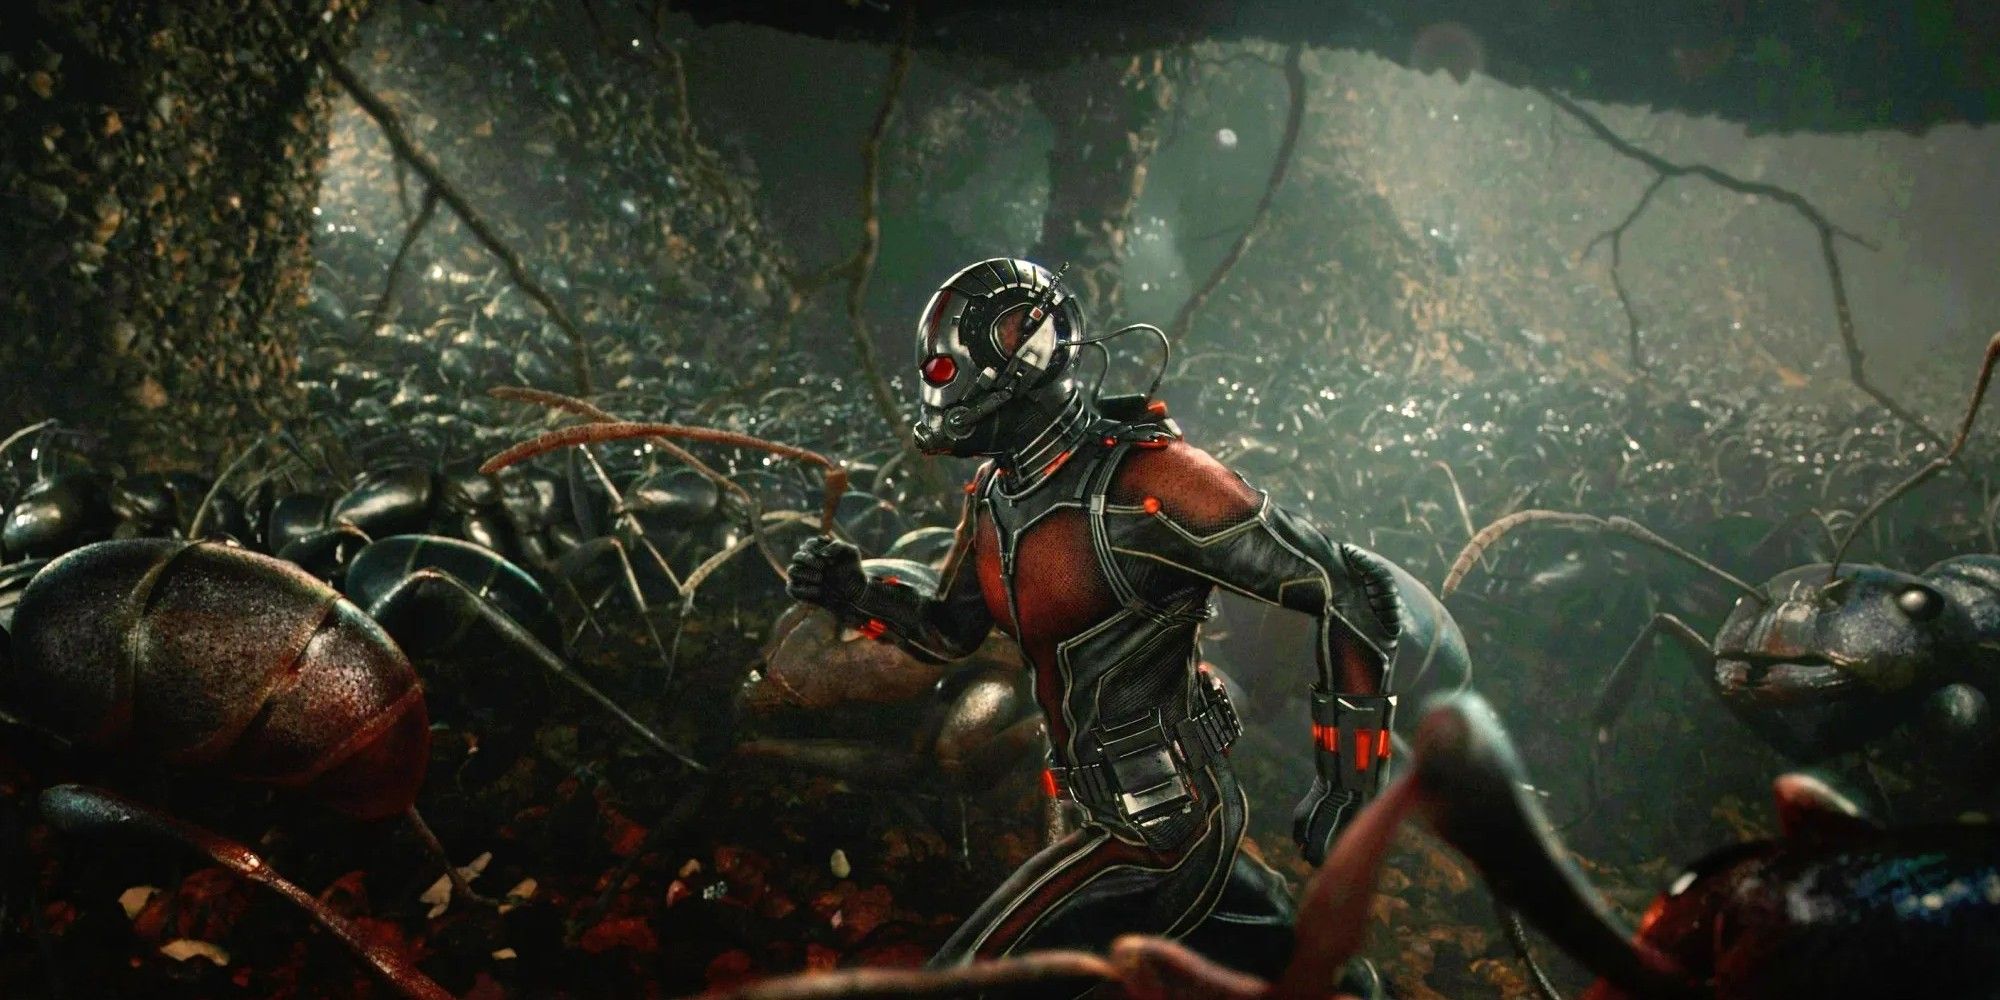 Ant-Man running underground with a group of ants